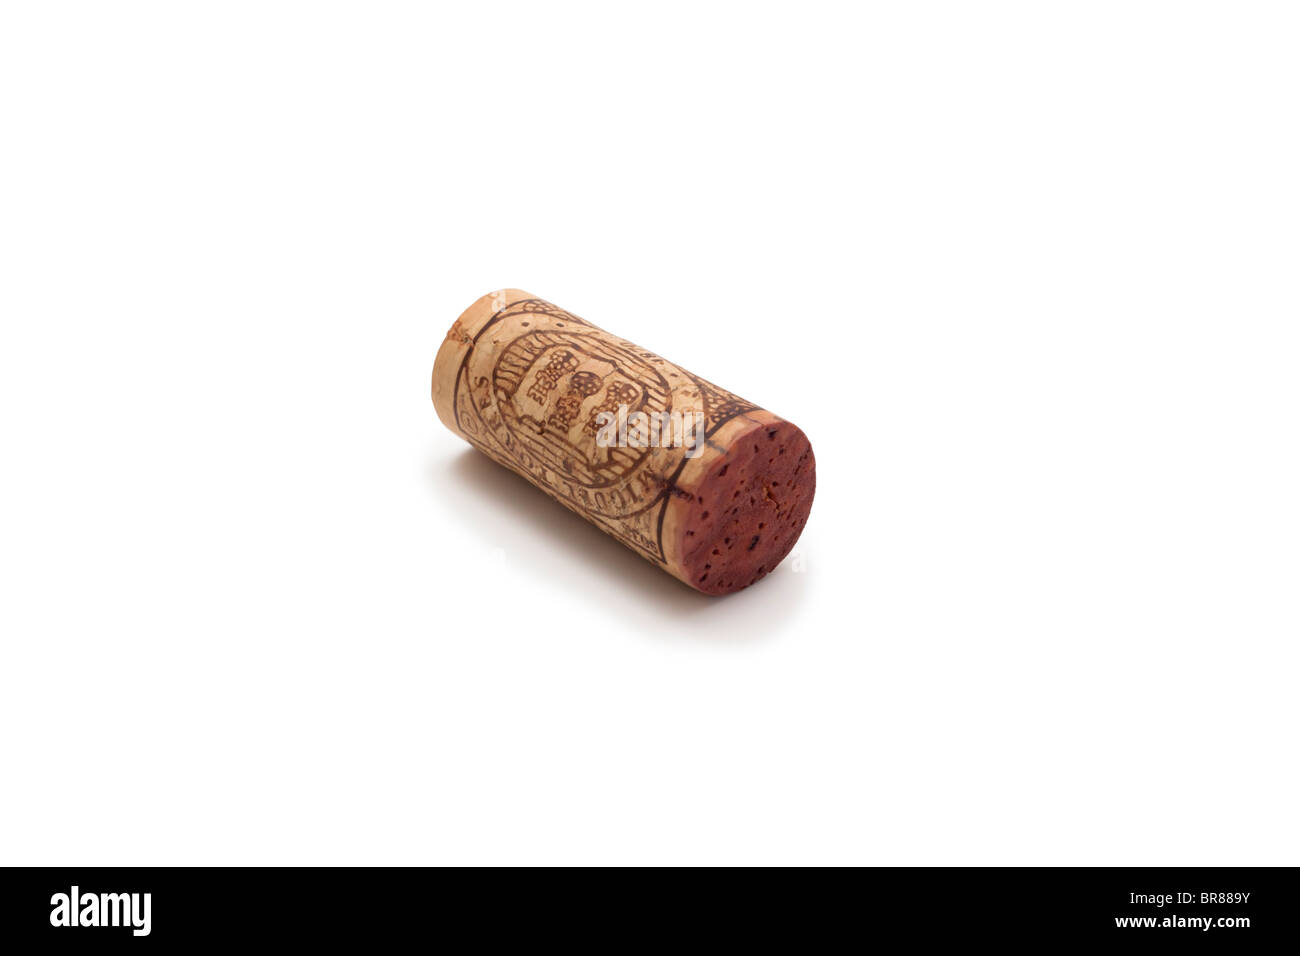 Cork from a bottle of red wine Stock Photo